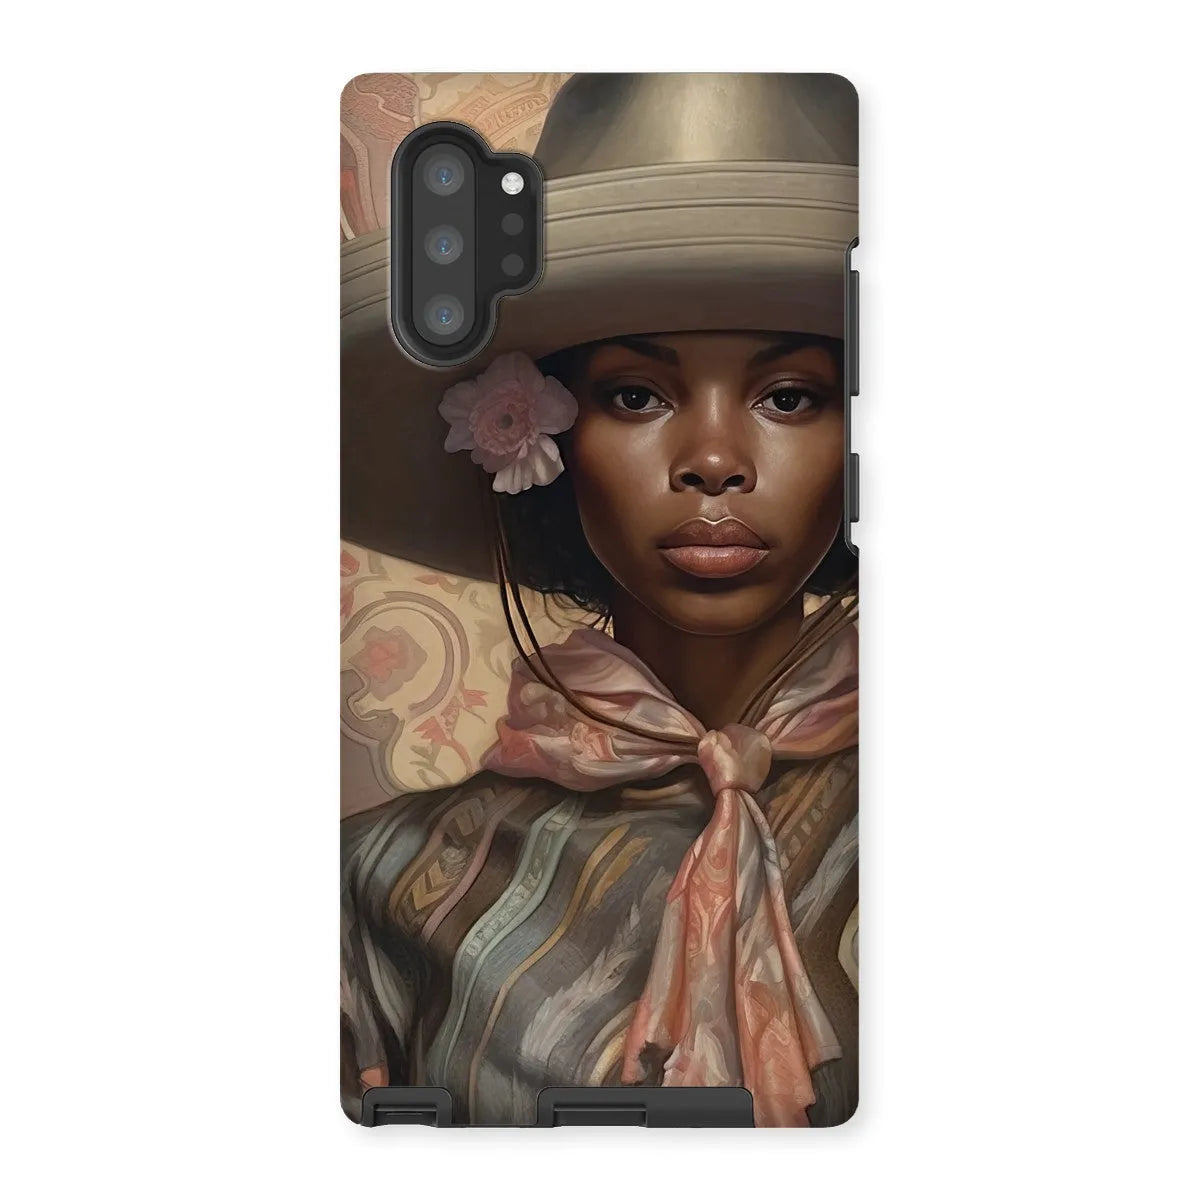 Sadie The Lesbian Cowgirl - Sapphic Art Phone Case - Samsung Galaxy Note 10p / Matte - Mobile Phone Cases - Aesthetic